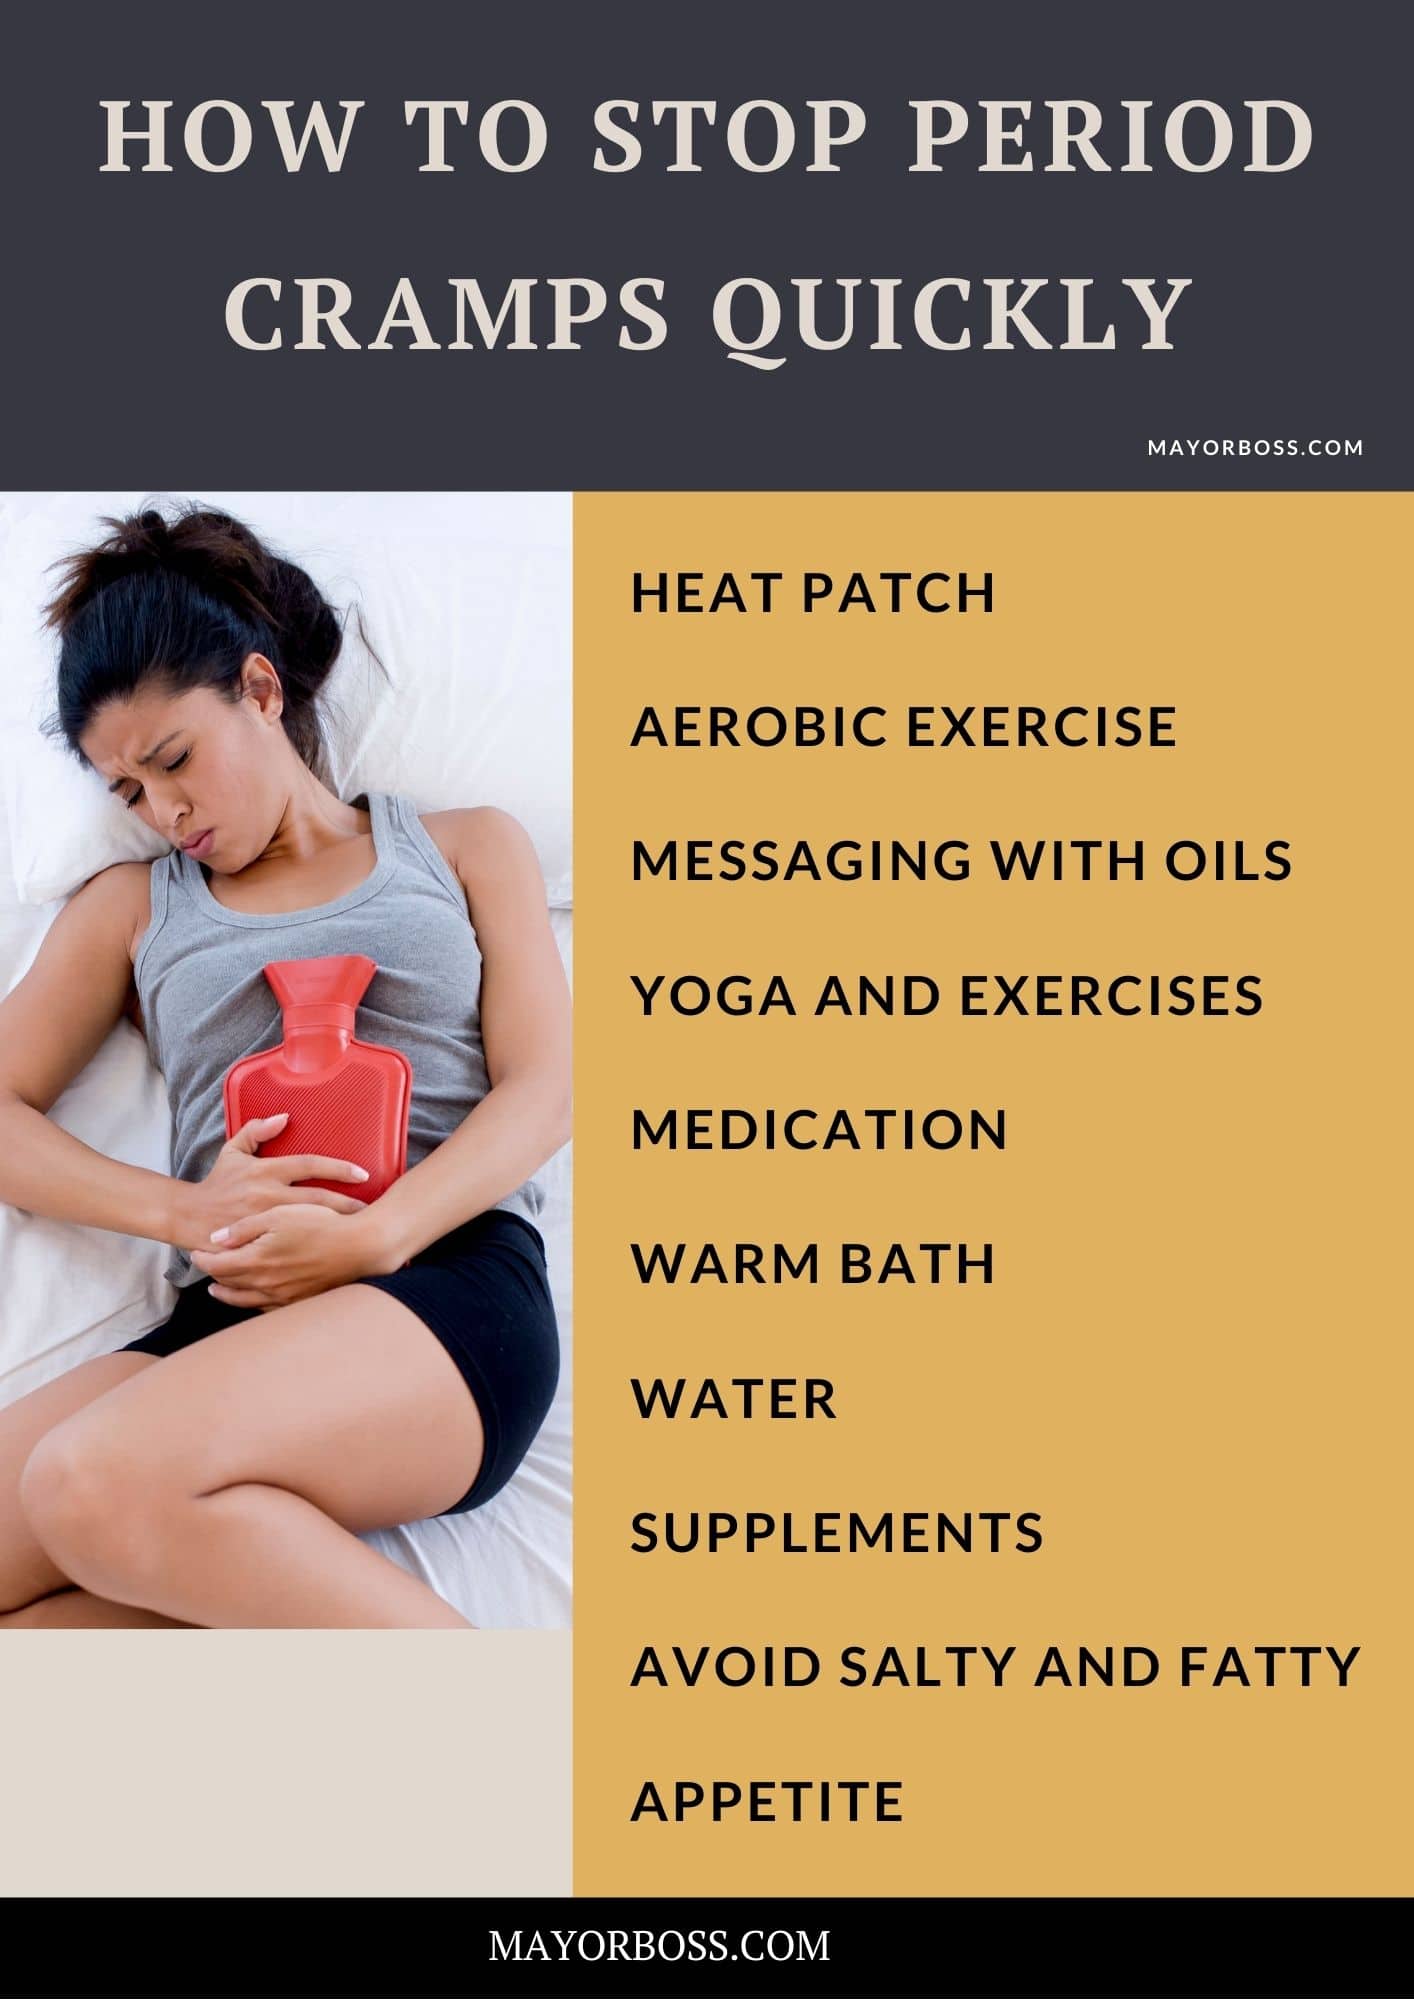 How To Stop Period Cramps Quickly